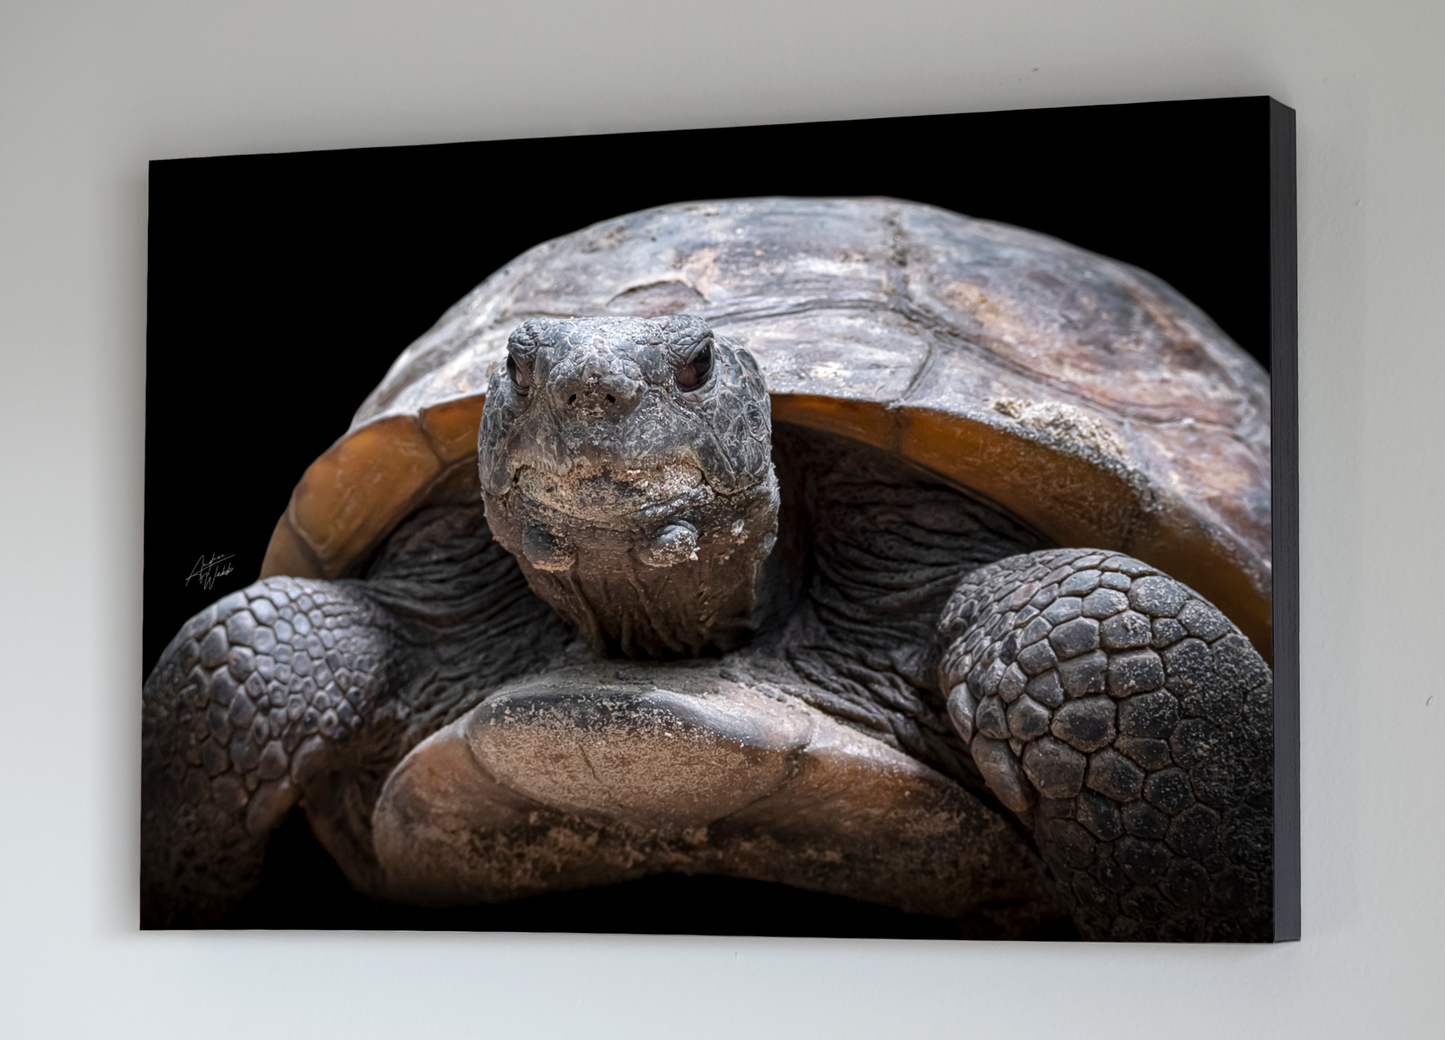 gopher tortoise close up portrait, gopher tortoise portrait, gopher tortoise artwork, gopher tortoise art, gopher tortoise wall art, gopher tortoise canvases, gopher tortoise gifts.